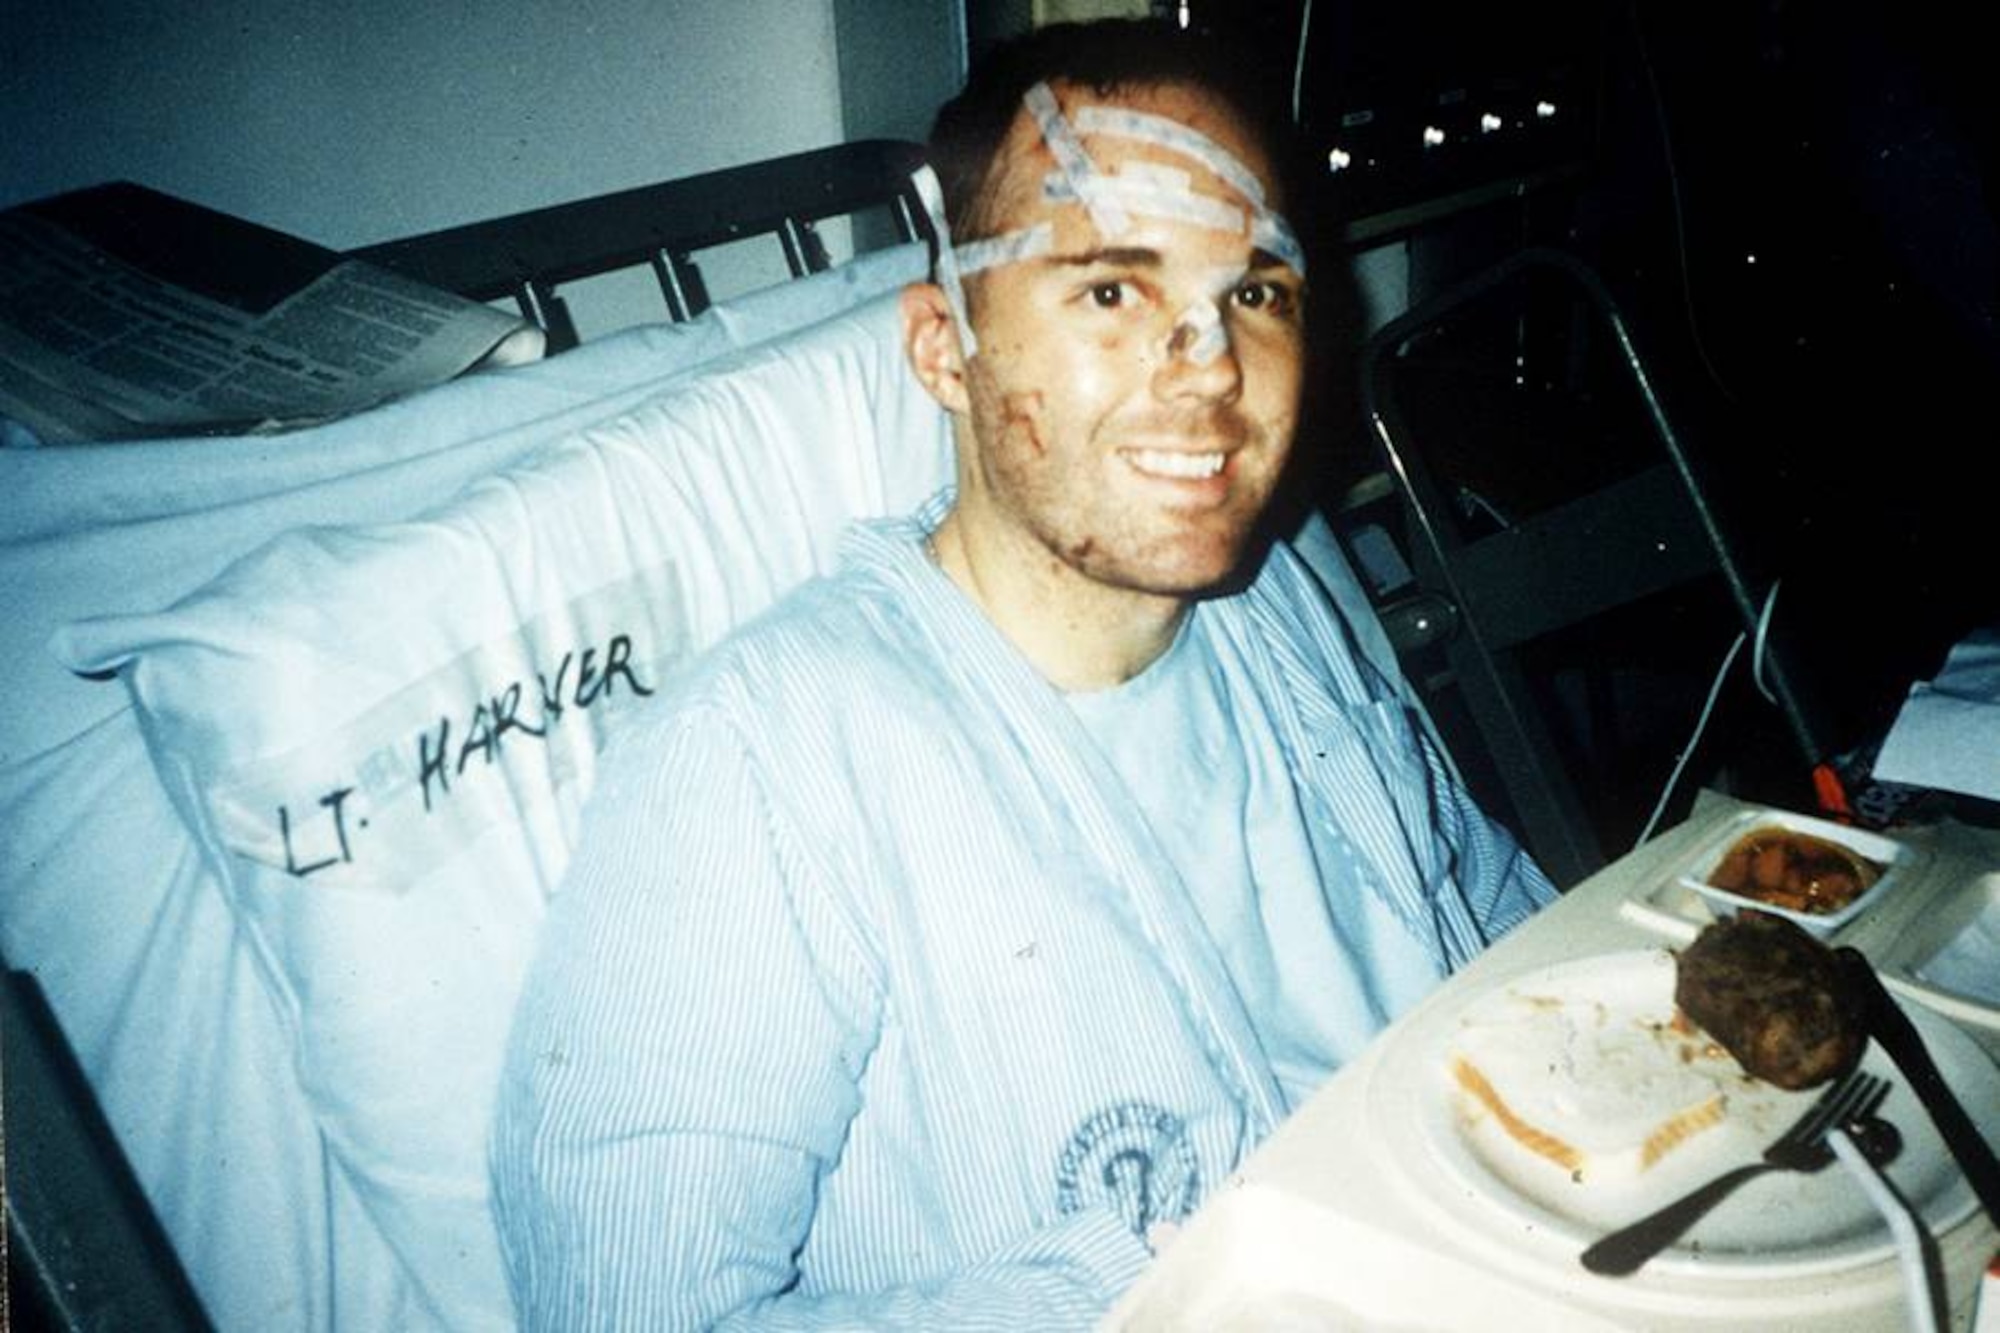 Then 1st Lt. Michael Harner smiles for the camer in a hospital bed while recovering from injuries sustained in the bombing of Khobar Towers in Dhahran, Saudi Arabia on June 25, 1996. Lt. Col. Michael Harner is now on his fourth deployment as the commander of the 577th Expeditionary Prime BEEF Squadron. (courtesy photo)